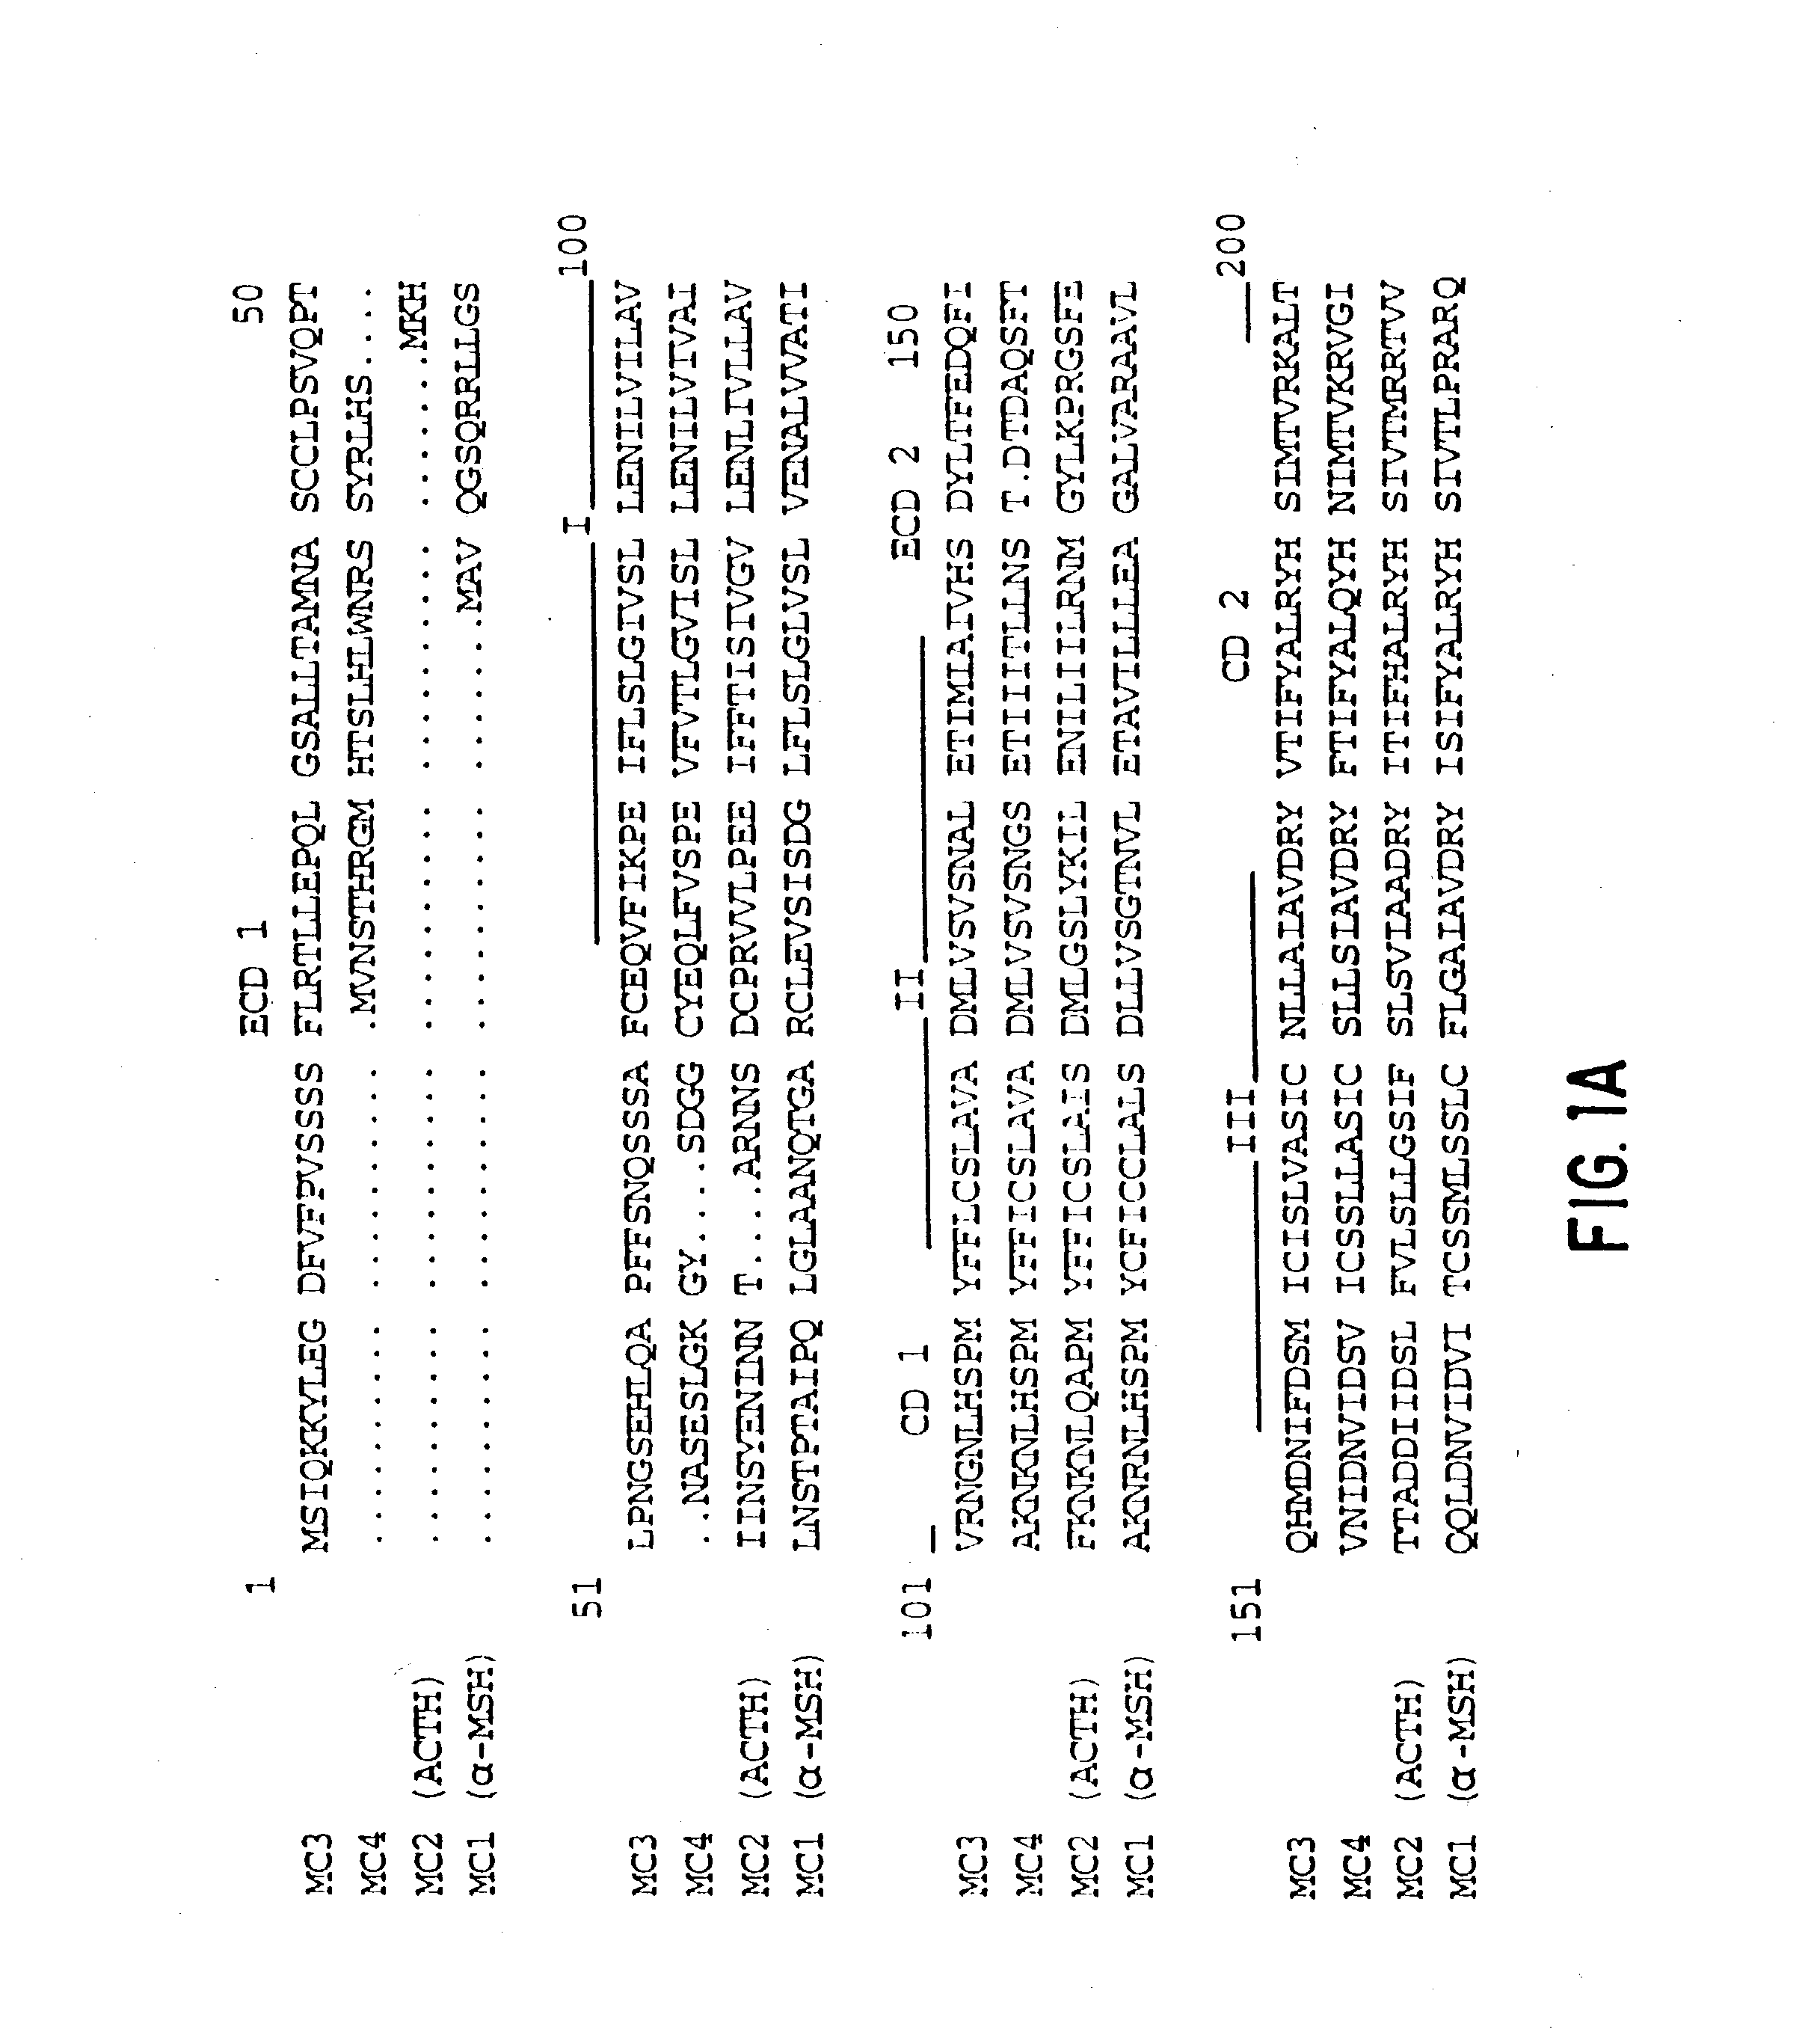 Screening methods for compounds useful in the regulation of body weight